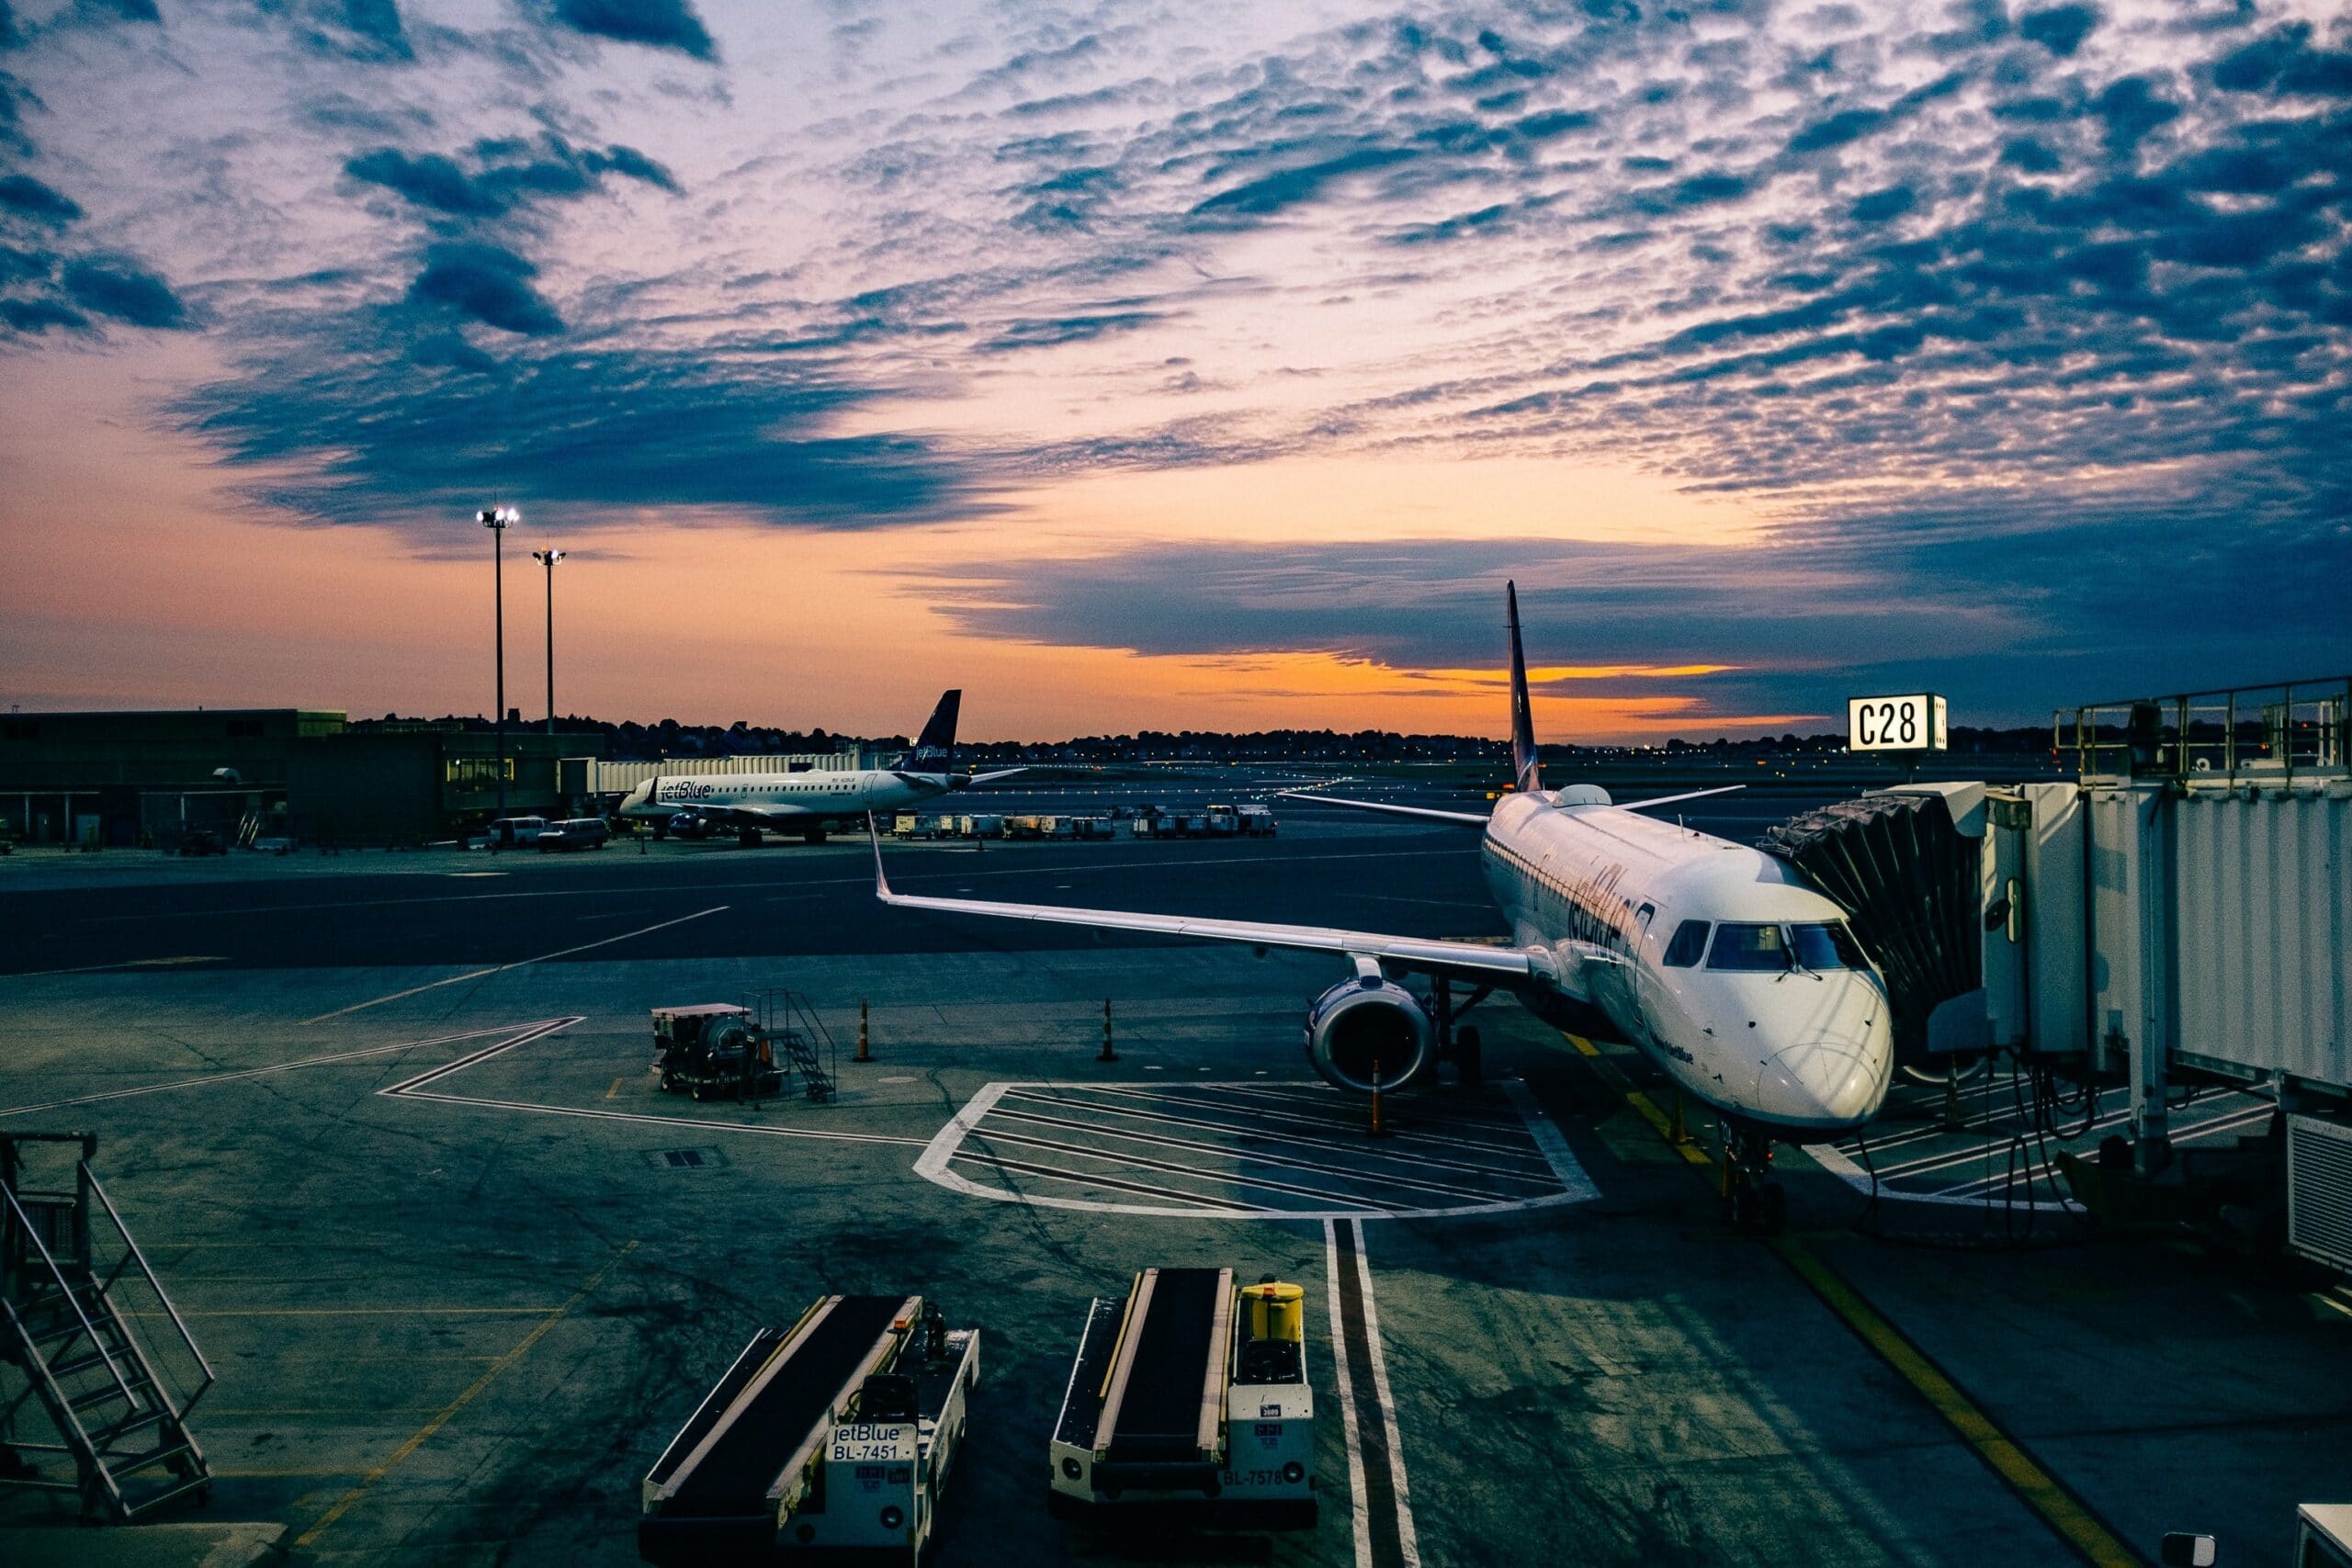 Investment in Airport Infrastructure - ashim d silva pGcqw1ARGyg unsplash scaled